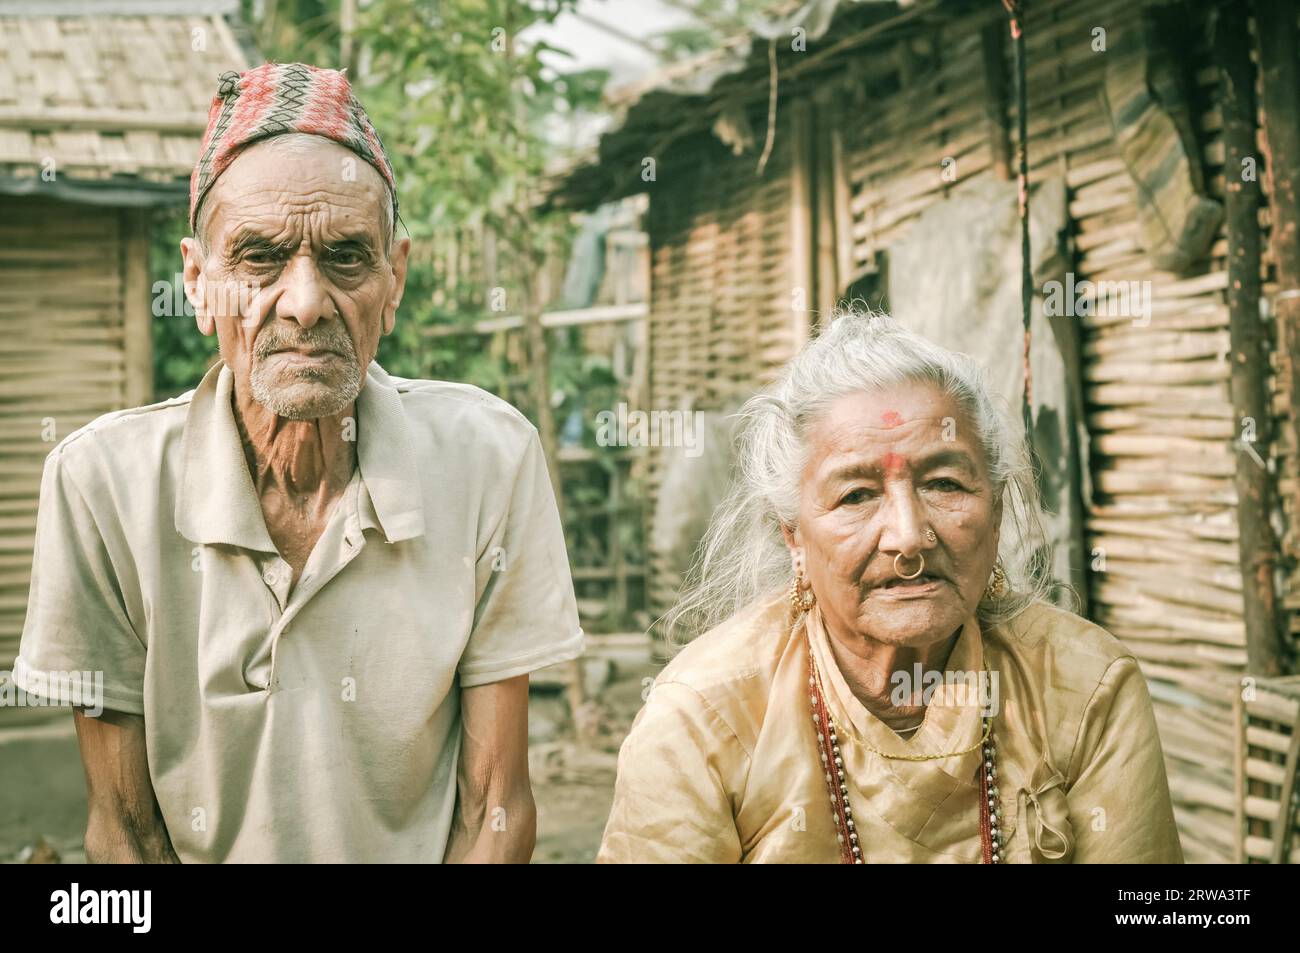 Damak, Nepal, circa May 2012: Old man with wrinkles on his face and with cap on his head frowns and poses with woman at Nepali refugee camp in Damak Stock Photo